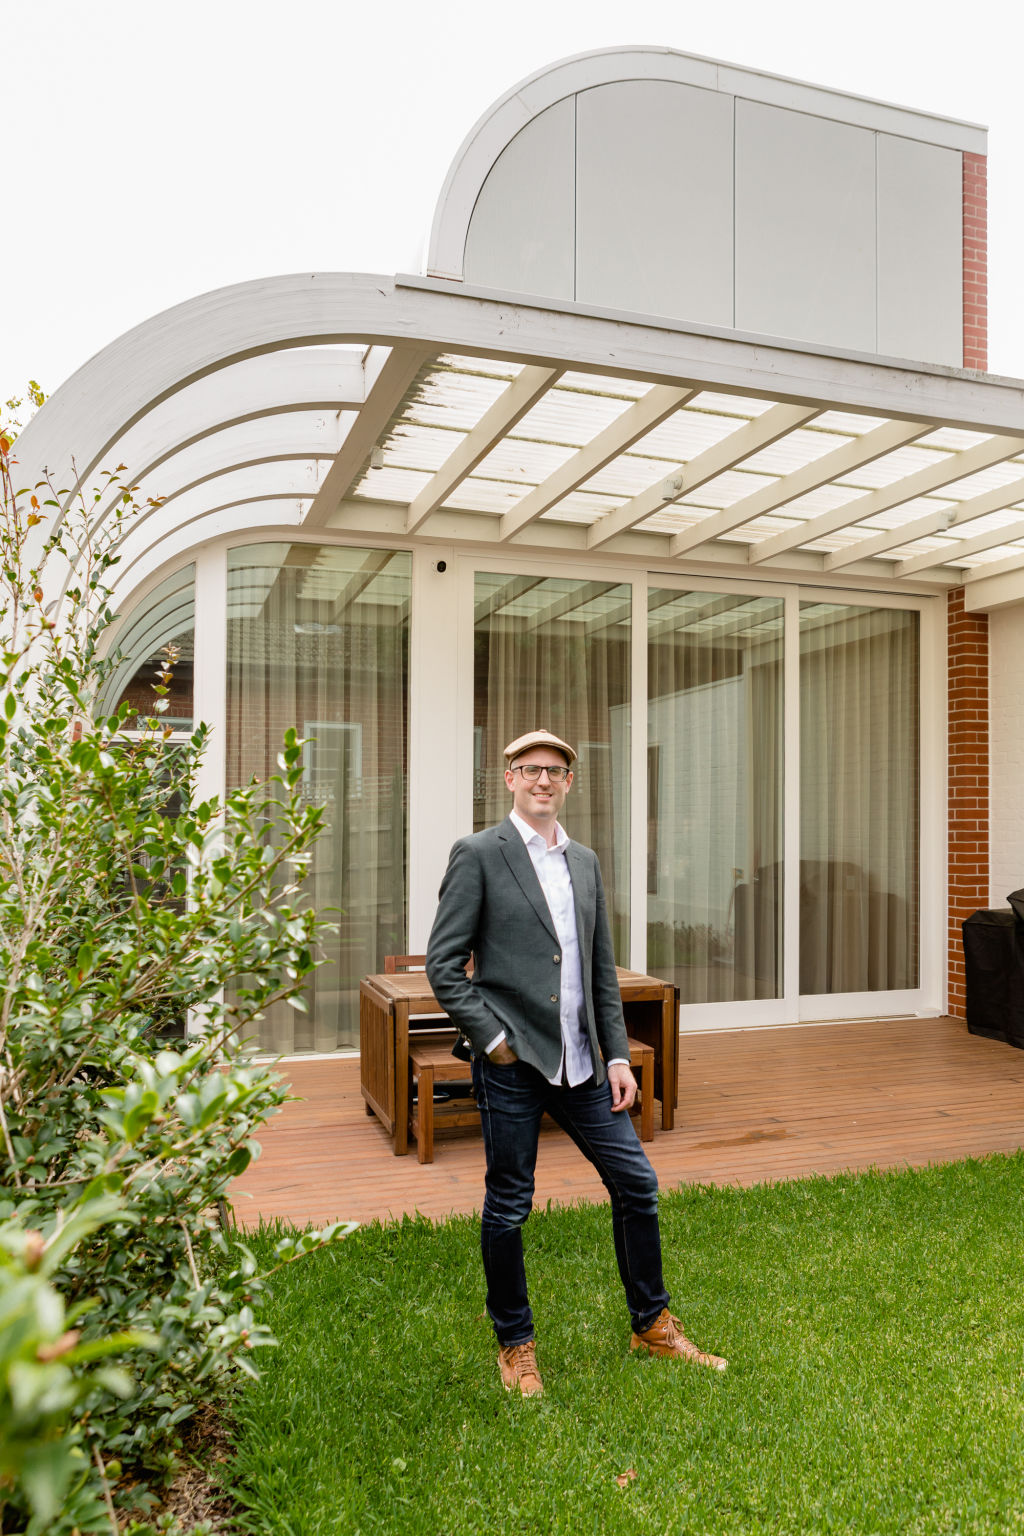 Warwick Mihaly at Deco House in Kew, designed by Mihaly Slocombe and constructed by Basis Builders. Photo: Greg Briggs